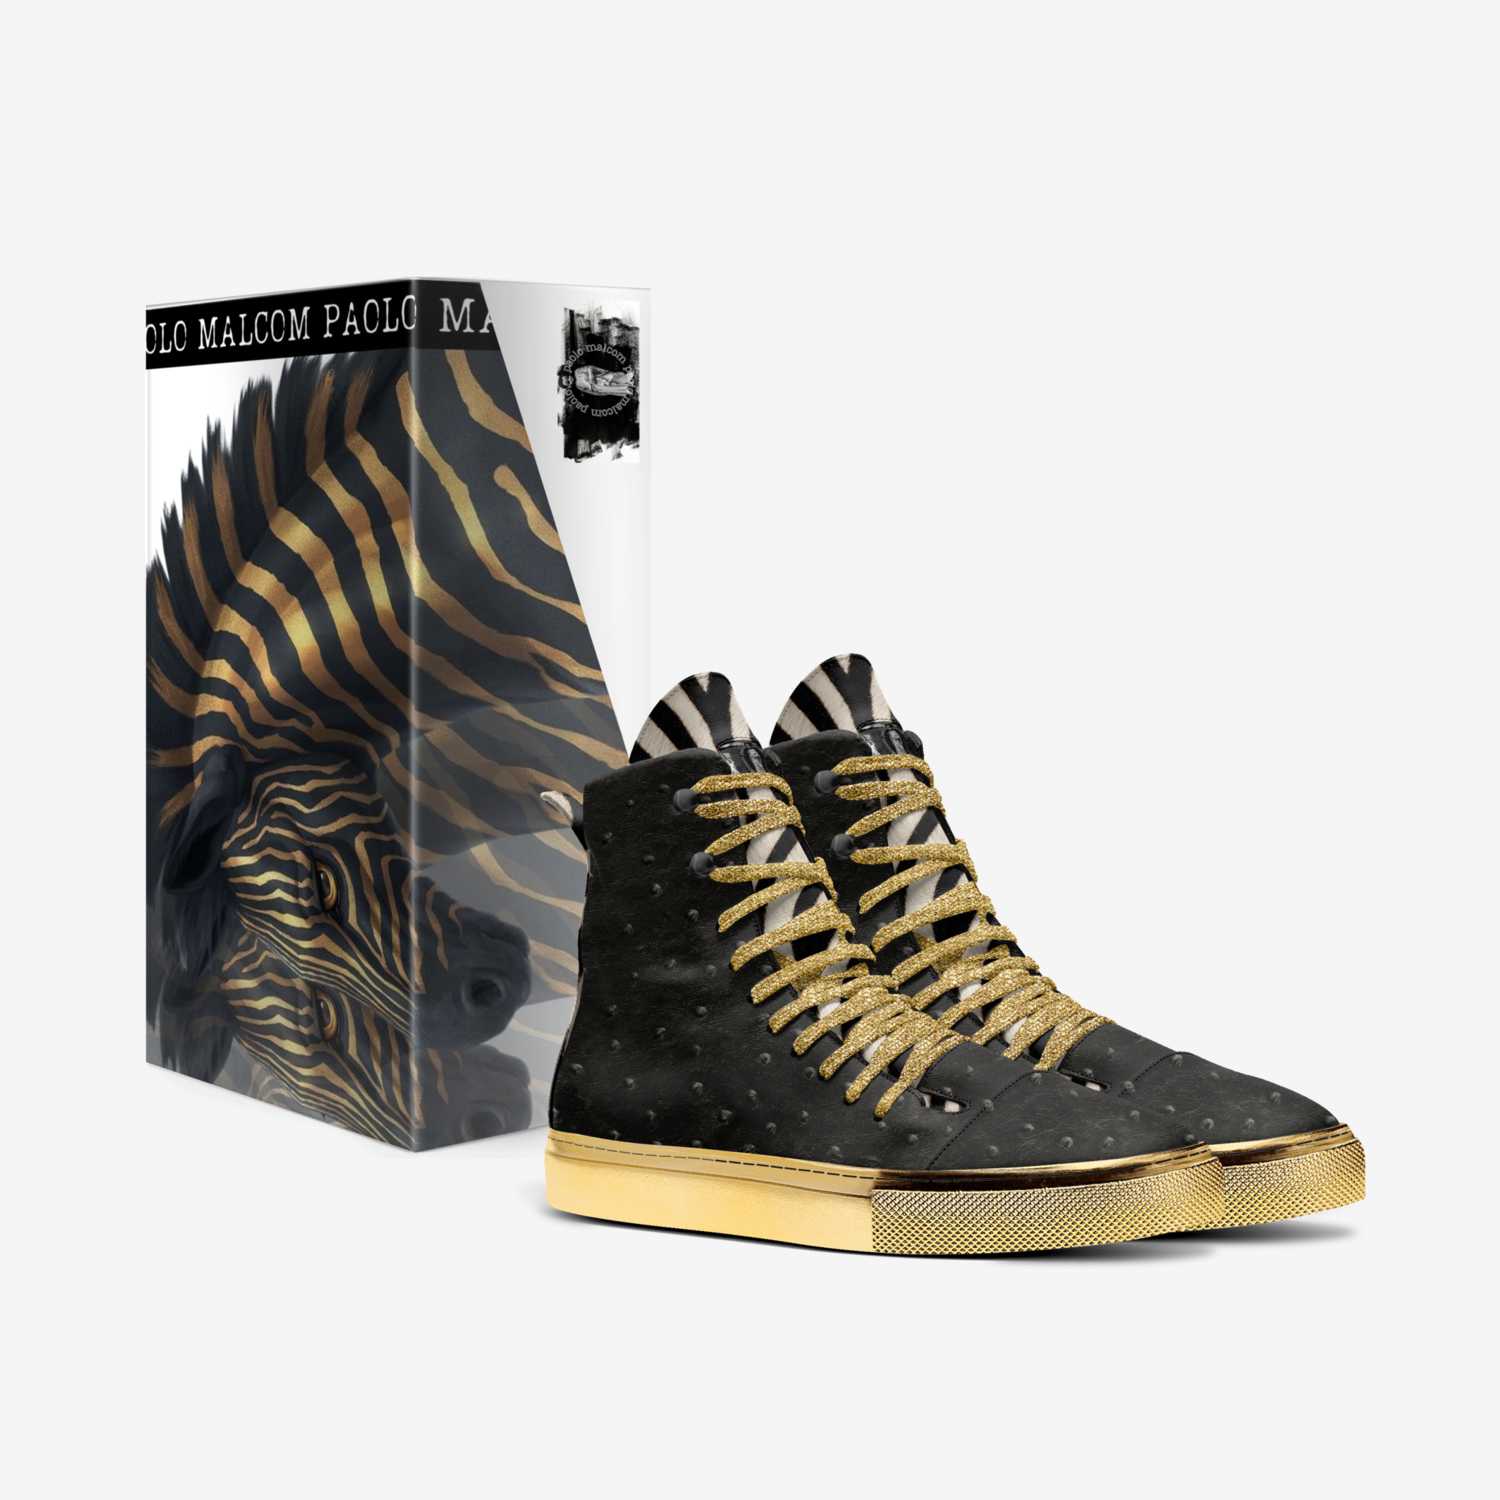 Zebra D'oro custom made in Italy shoes by Tigris Malcom | Box view